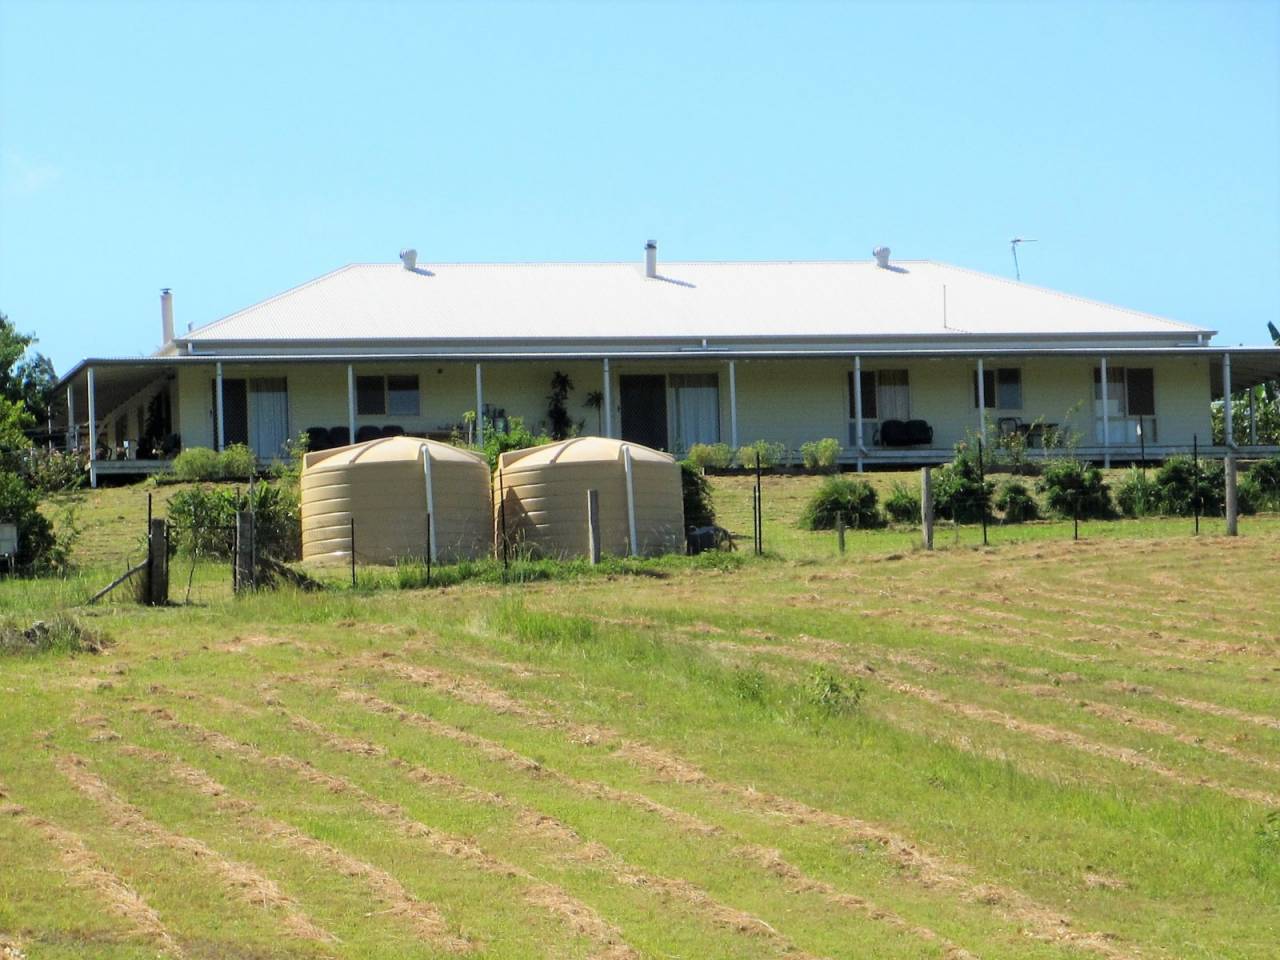 Rural property for sale casino nsw city